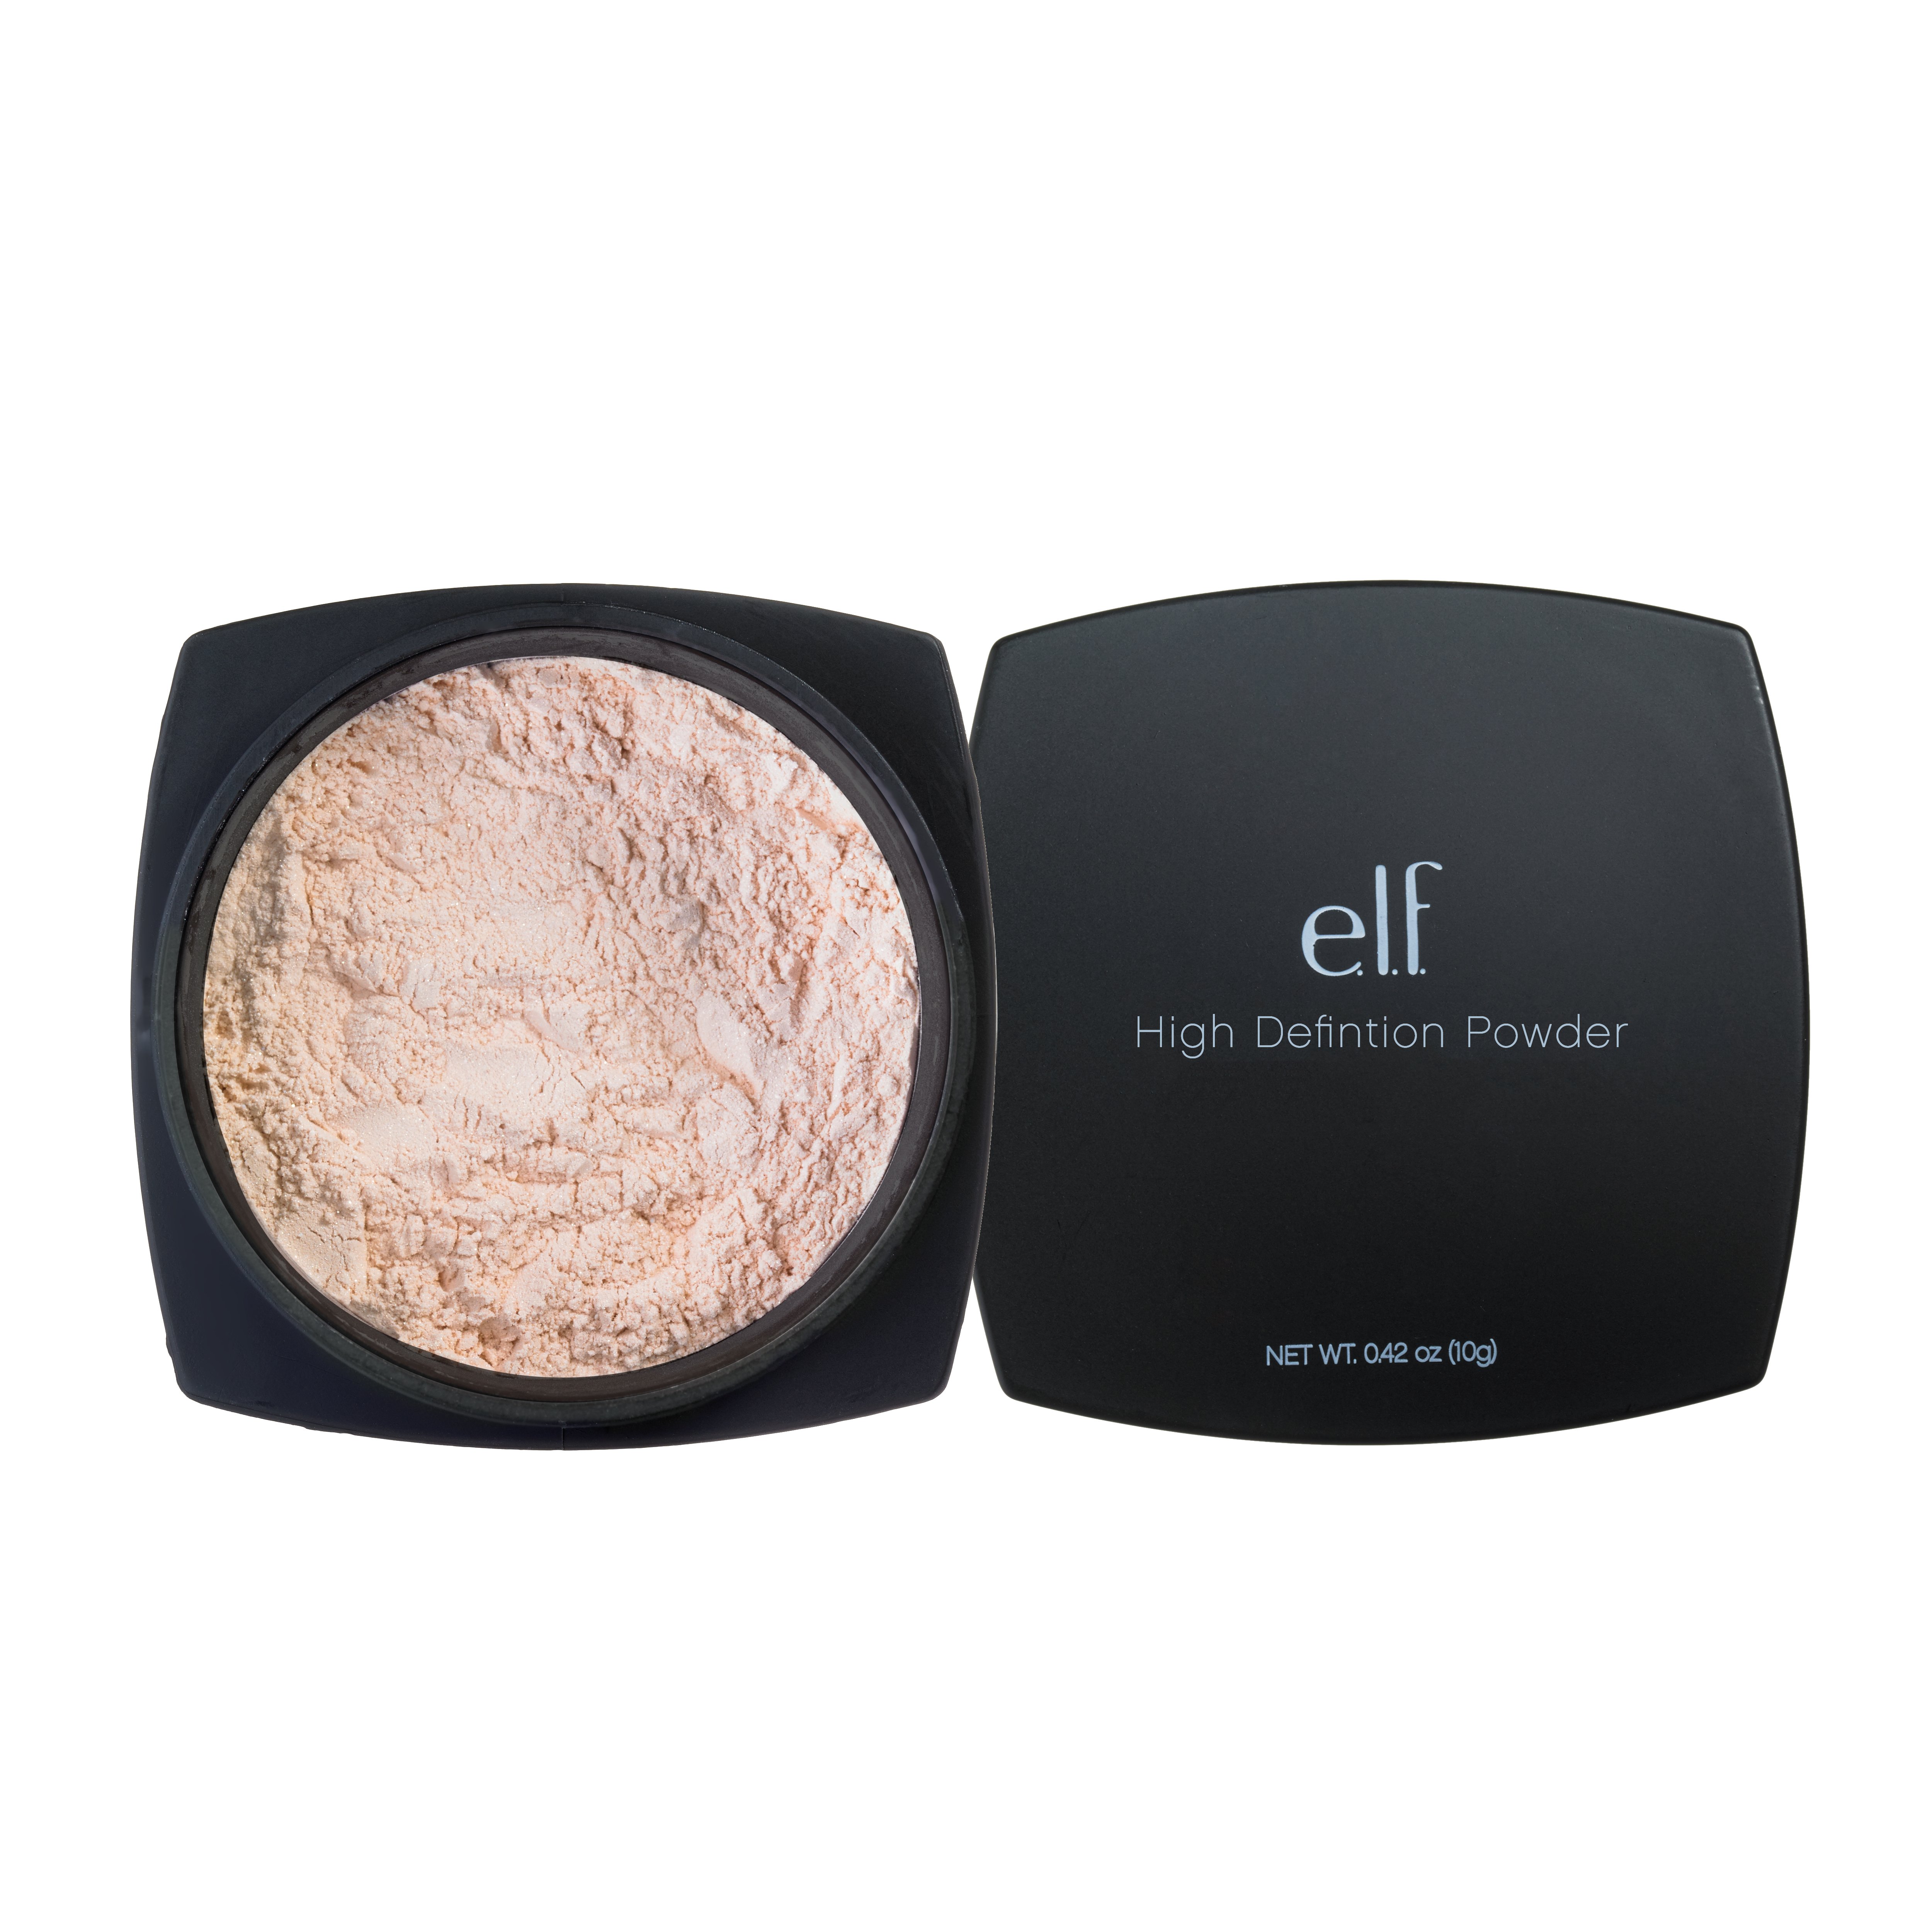 Does the Sheer ELF HD Loose powder also have glitter like the soft  luminance? : r/MakeupAddiction